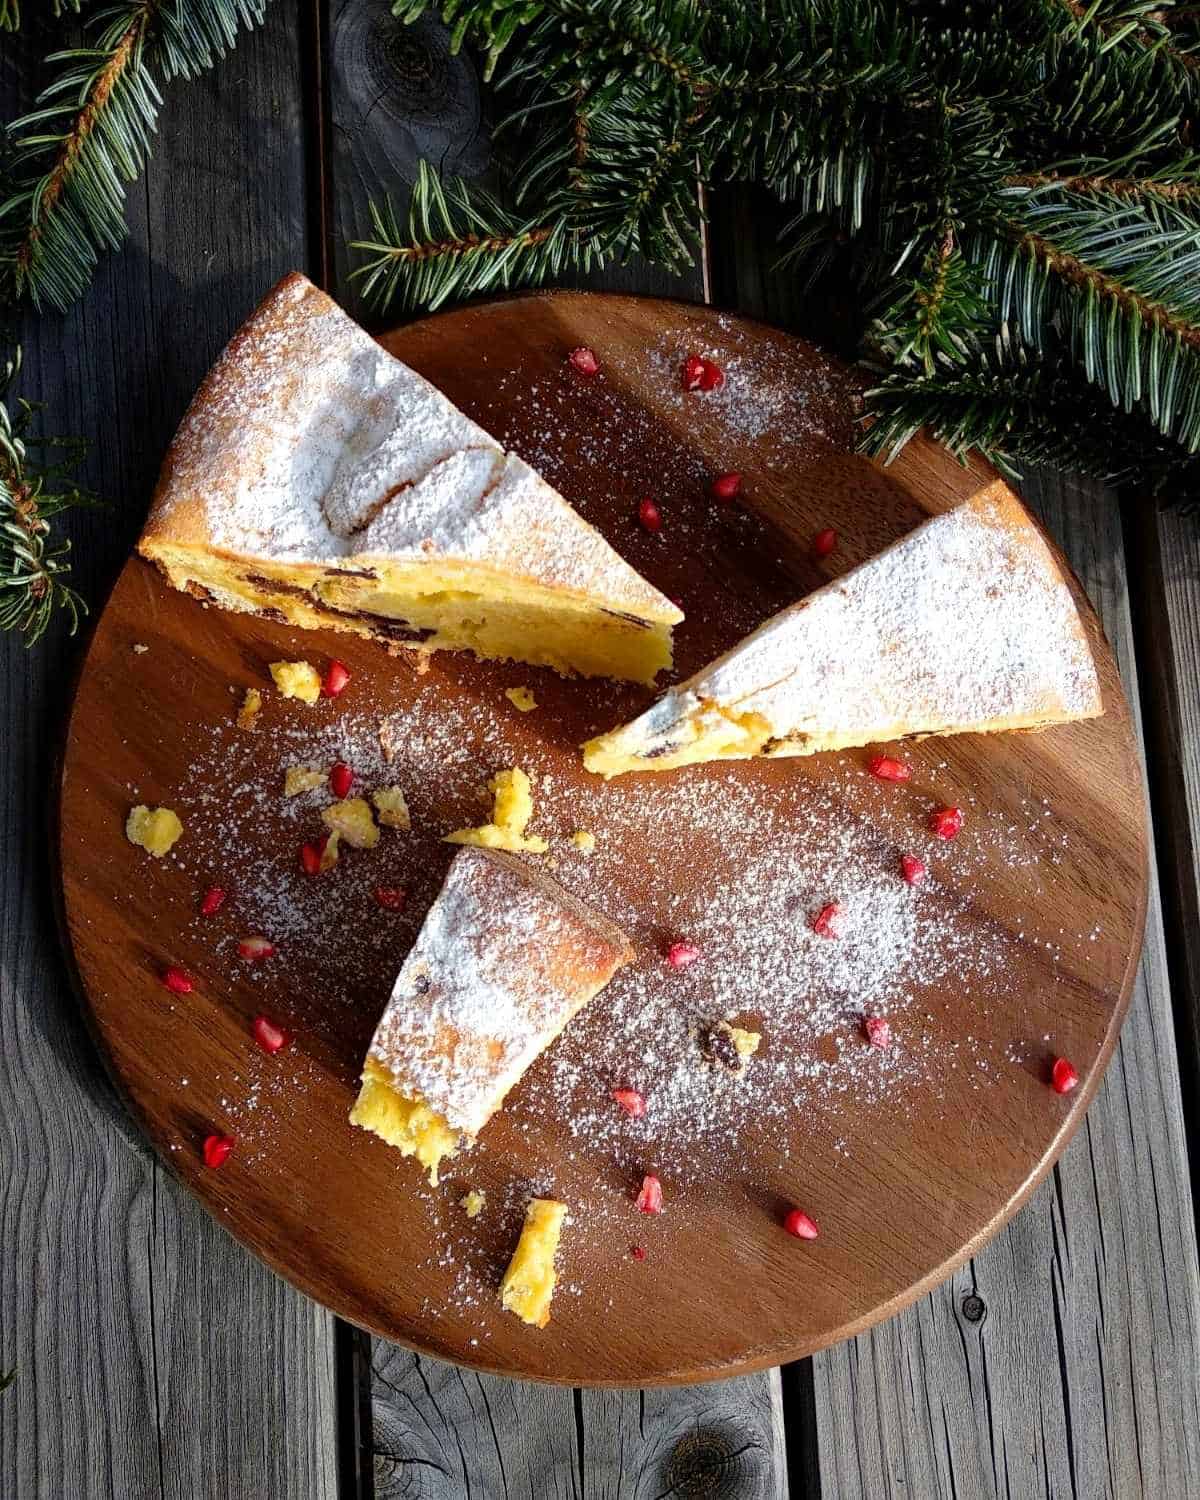 A close up from above Ricotta and Chocolate Cake on a wooden board. It is sliced showing the chocolate inside the cake. Some Pine branches in the background